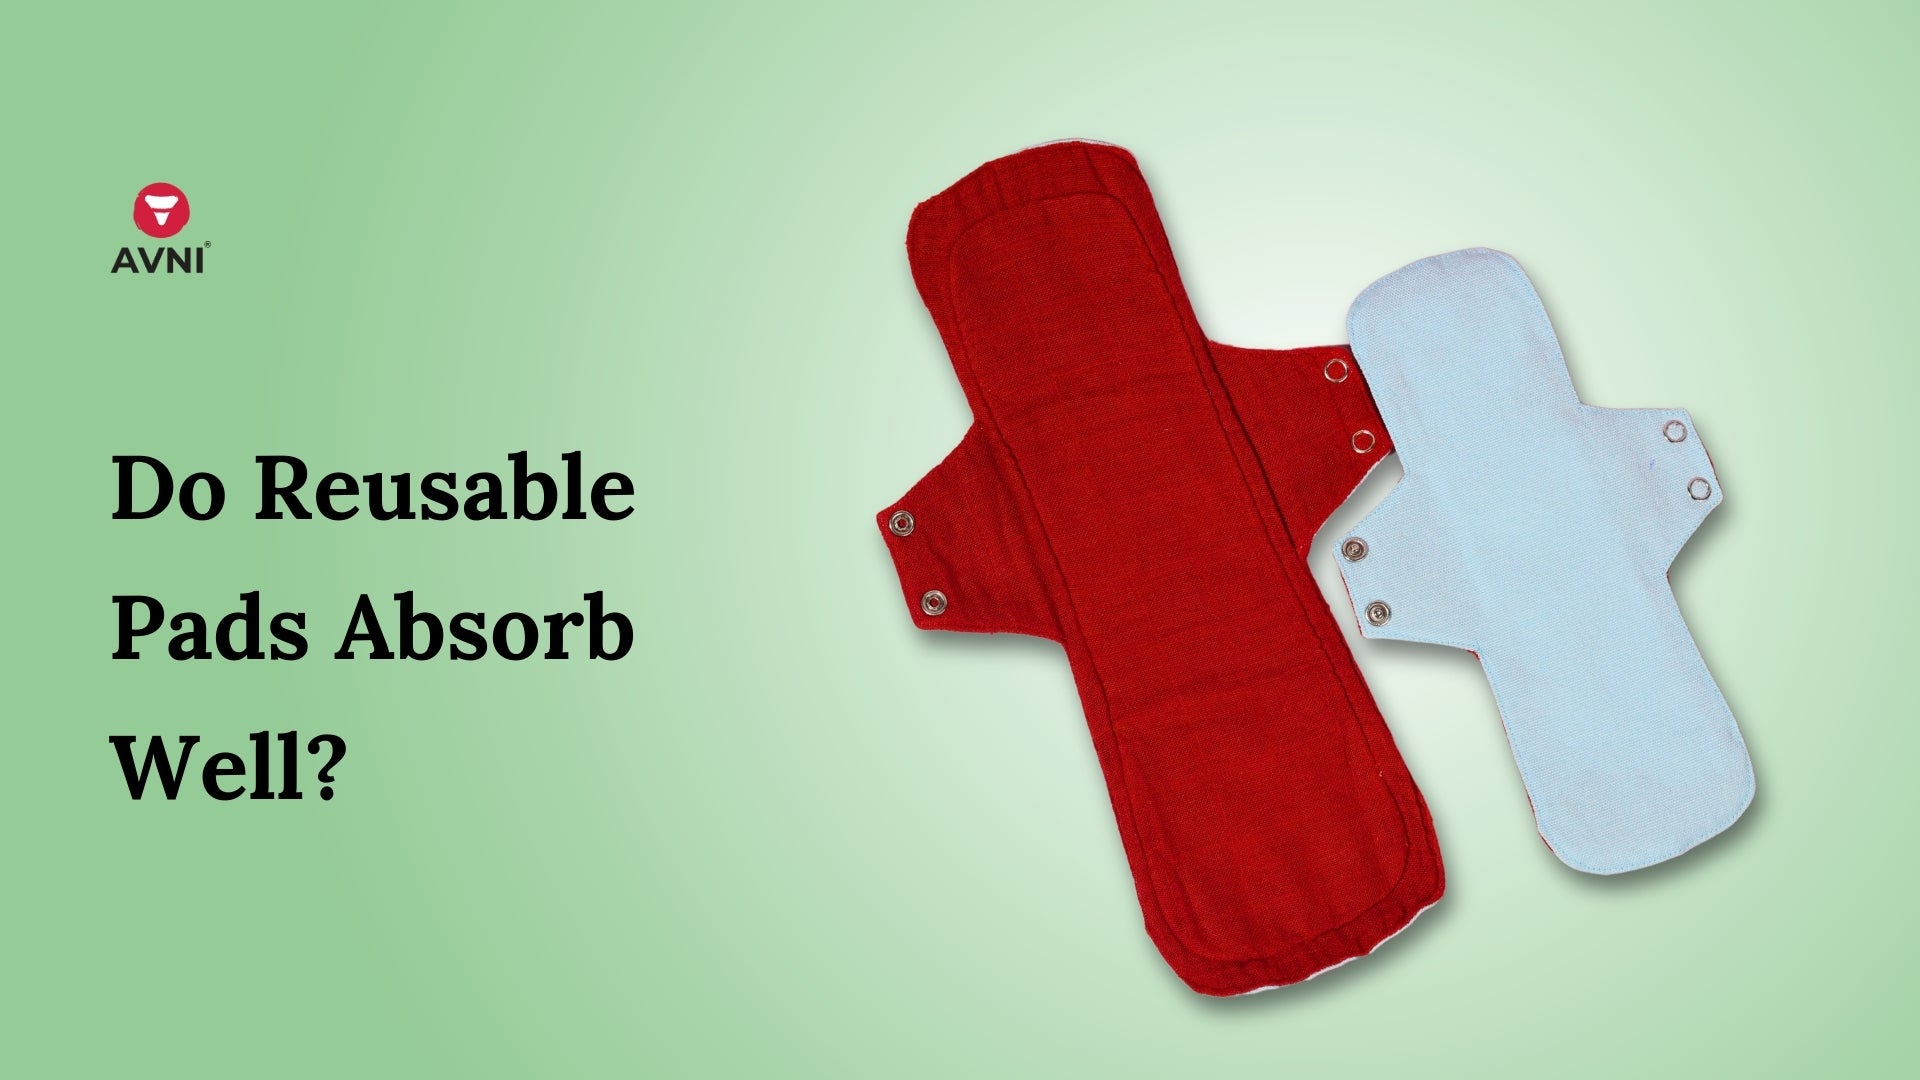 5 Amazing Benefits of Reusable Cloth Menstrual Pads + How to Switch